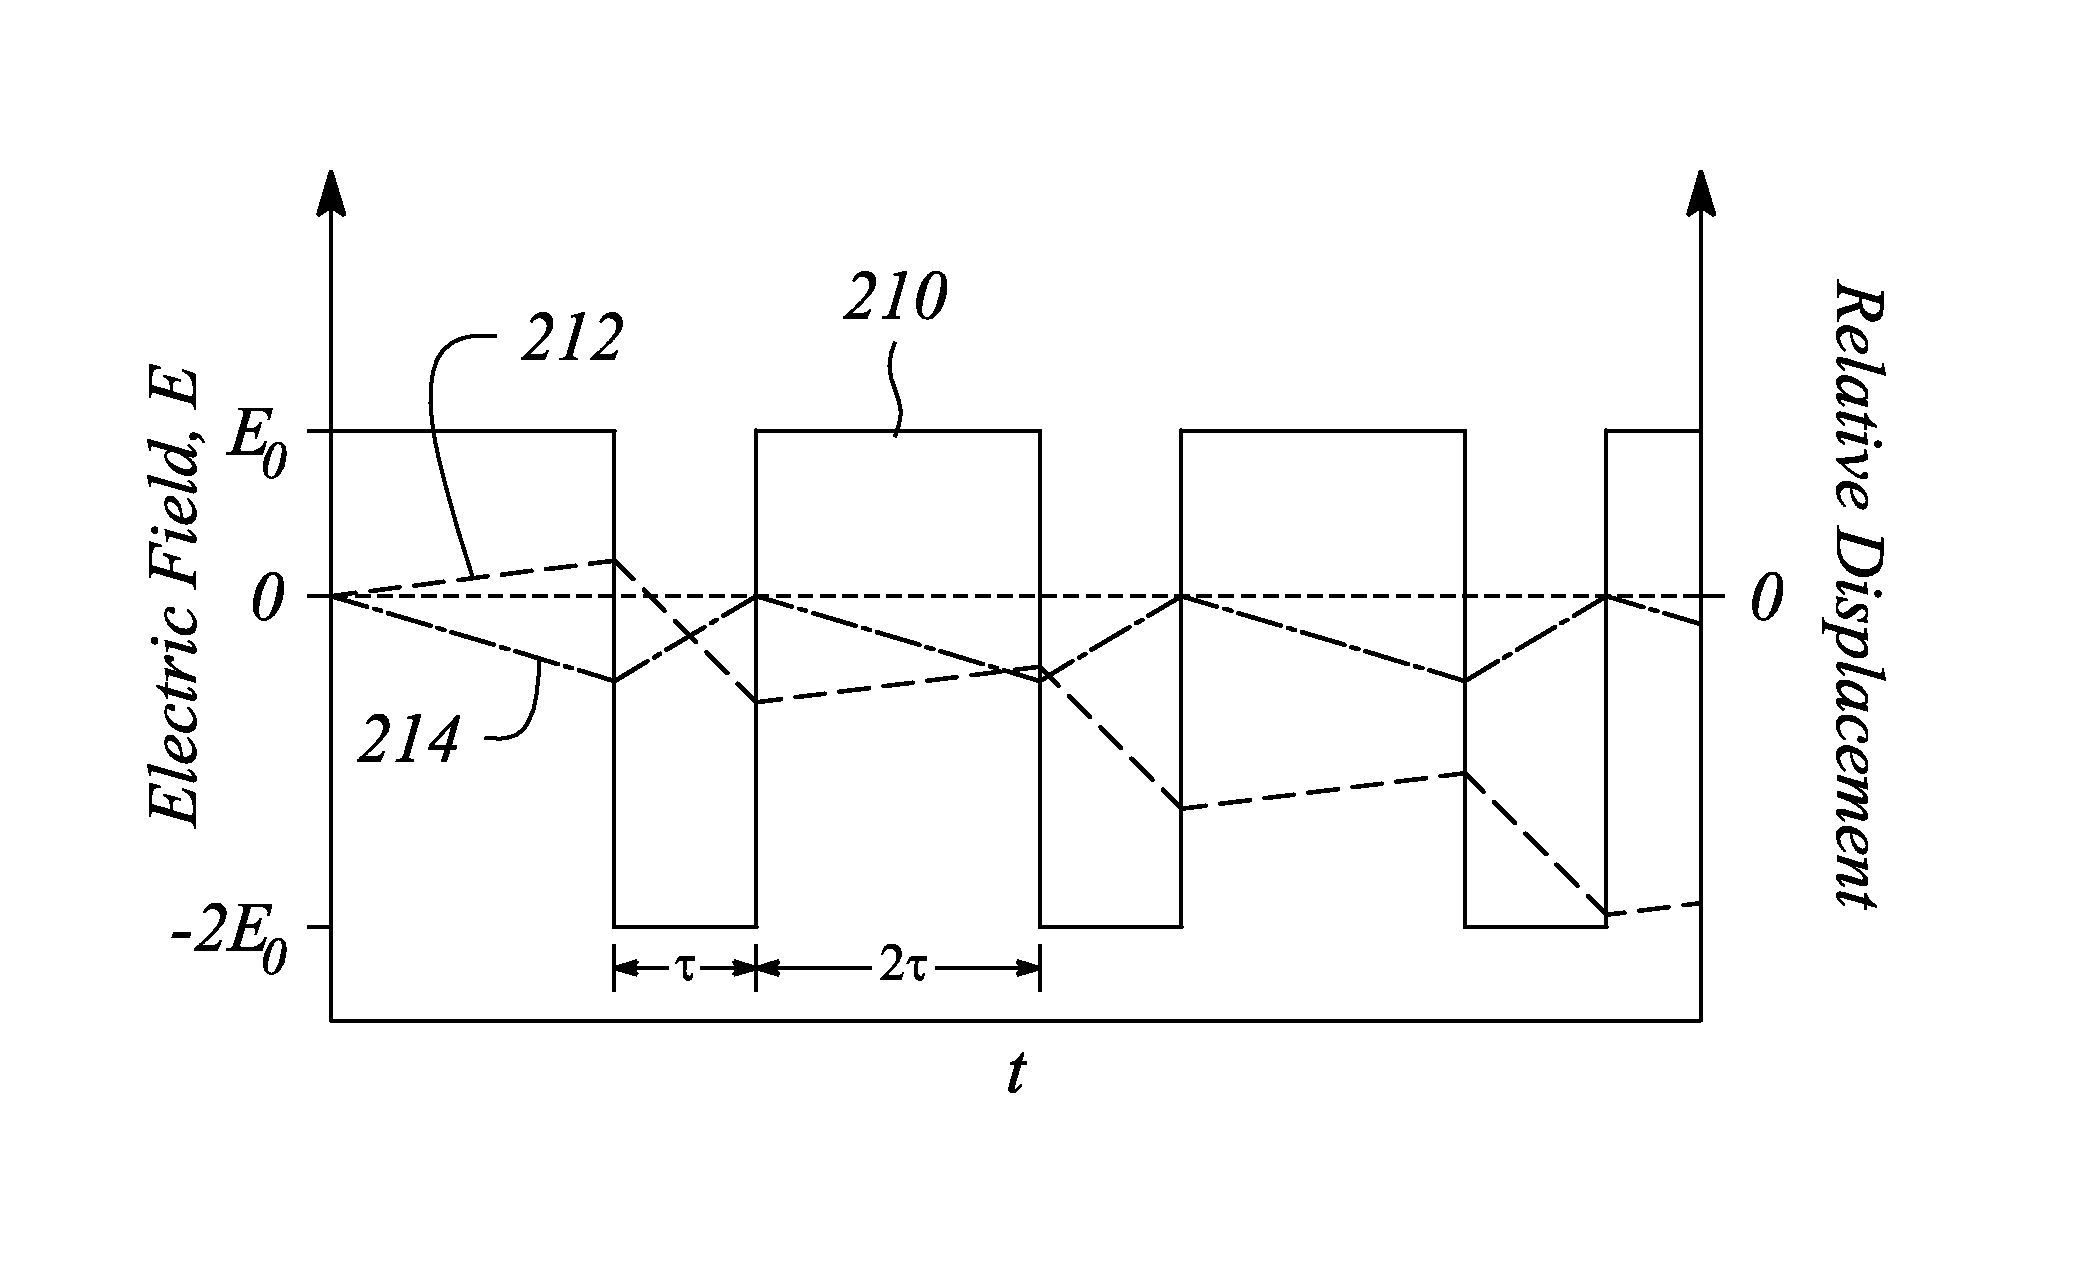 Electrophoretic cell and method employing differential mobility